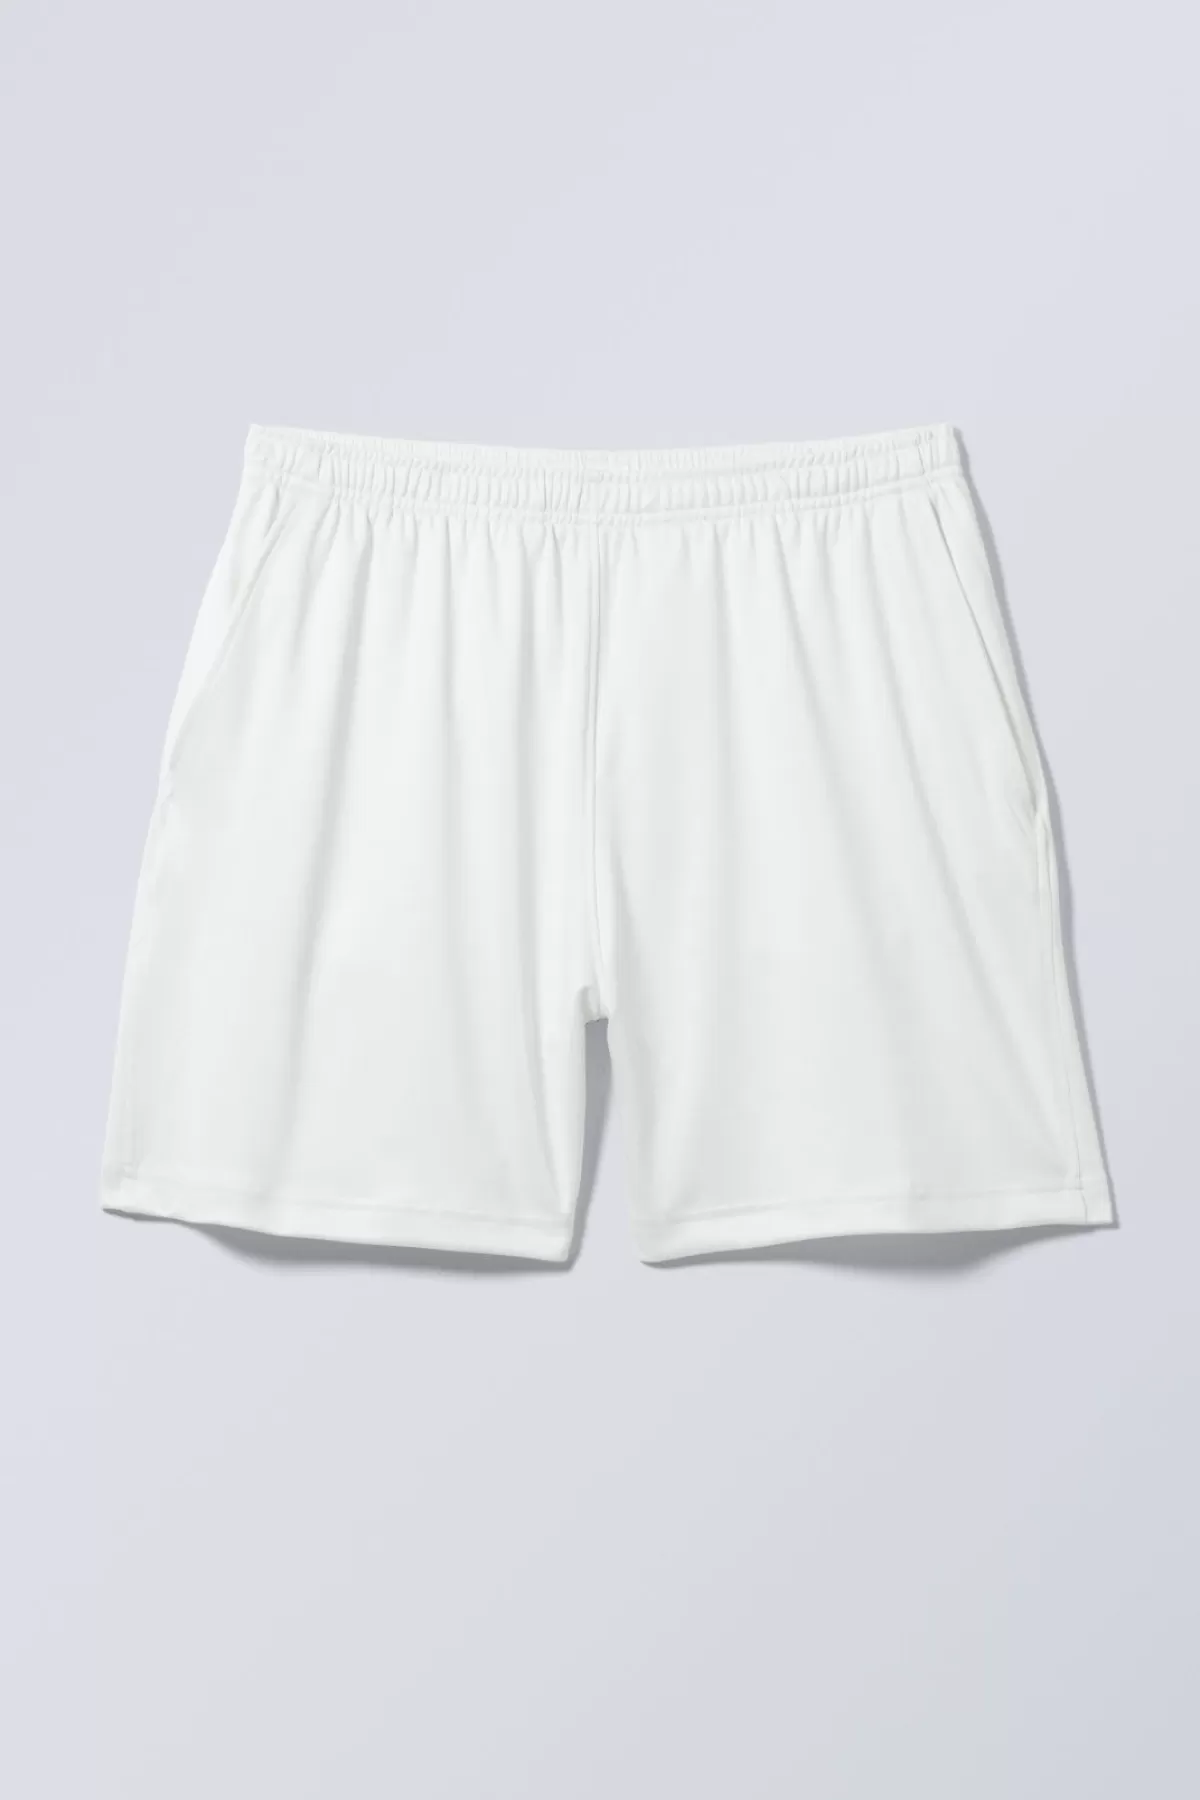 Weekday Loose Wide Track Shorts White Best